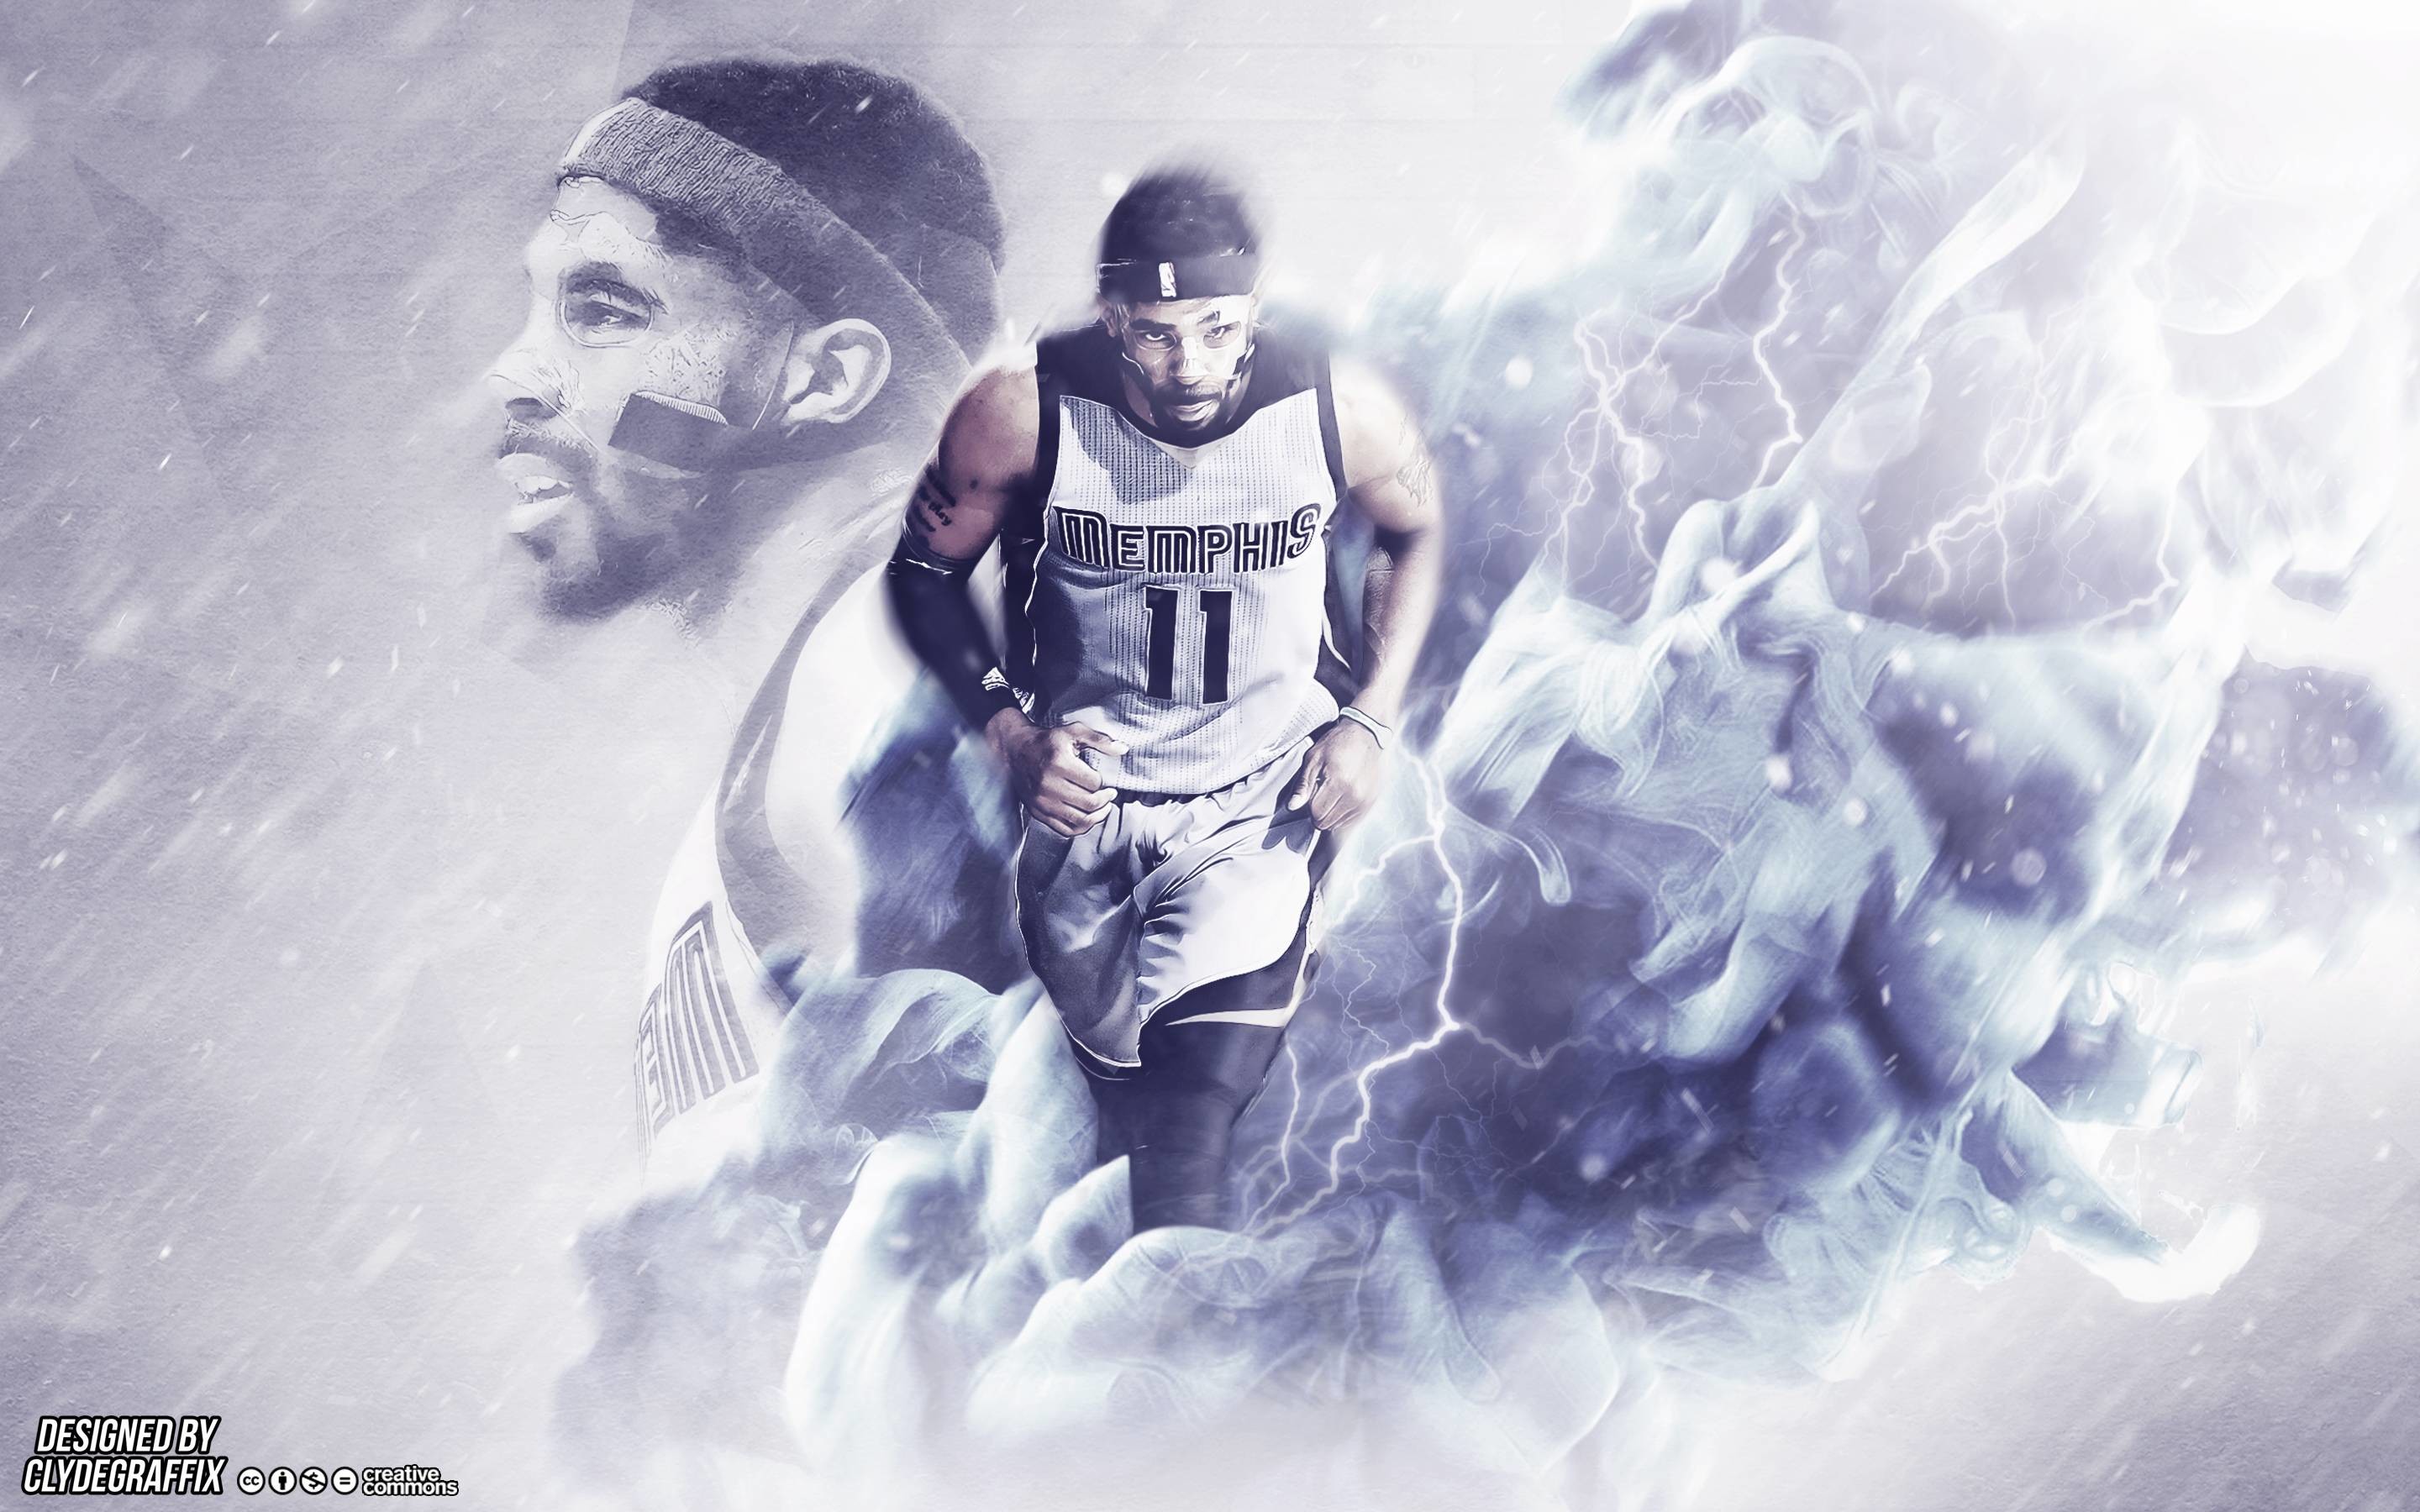 Share more than 68 wallpaper memphis grizzlies - in.cdgdbentre